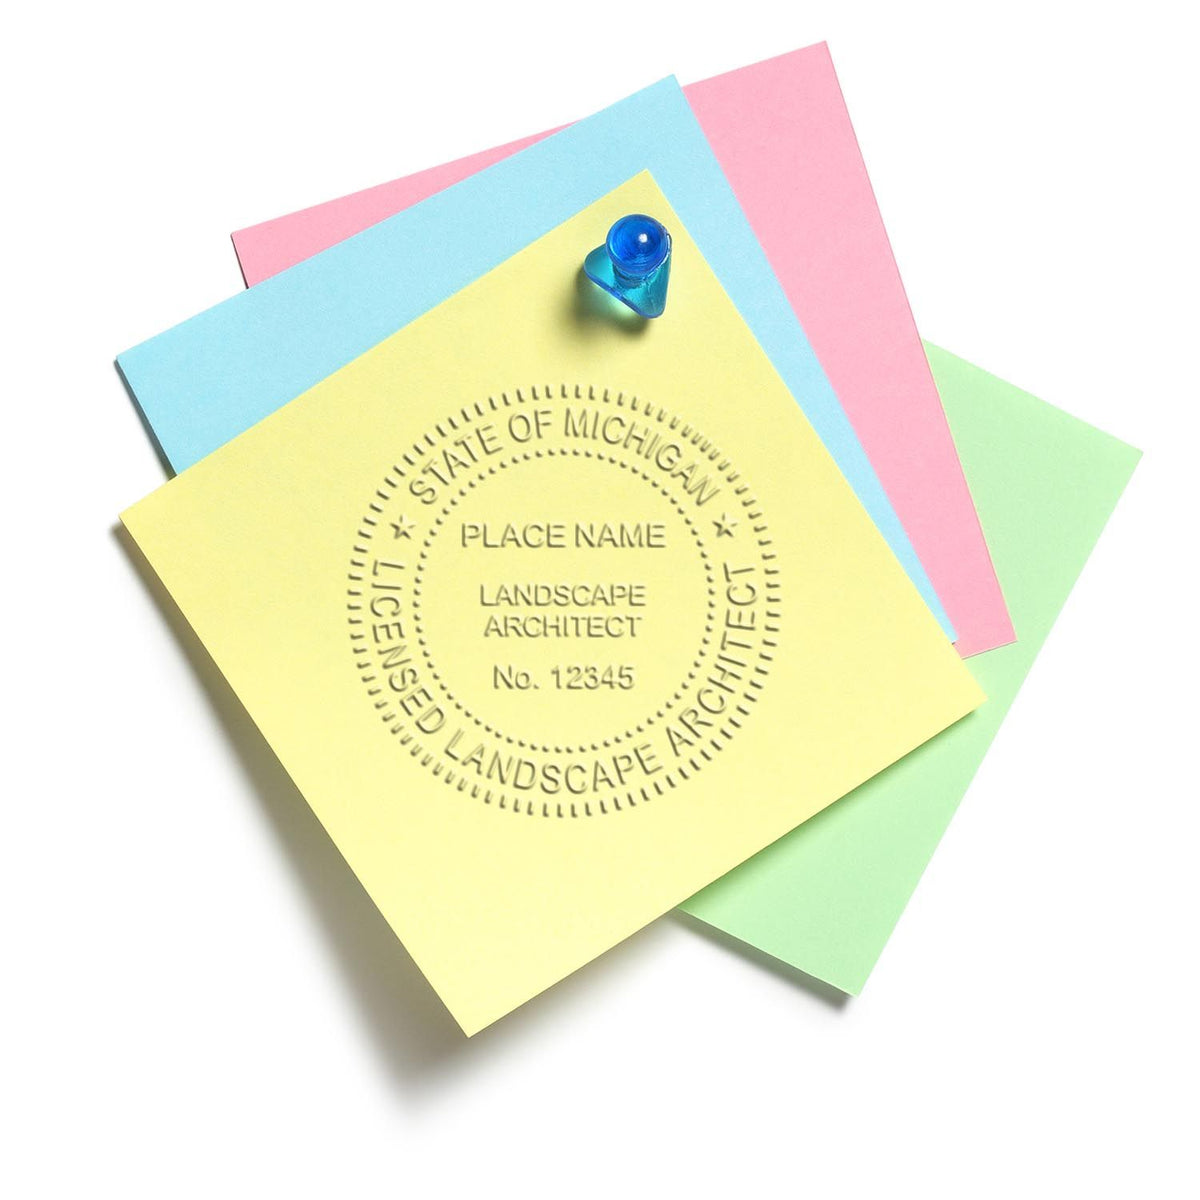 An in use photo of the Gift Michigan Landscape Architect Seal showing a sample imprint on a cardstock